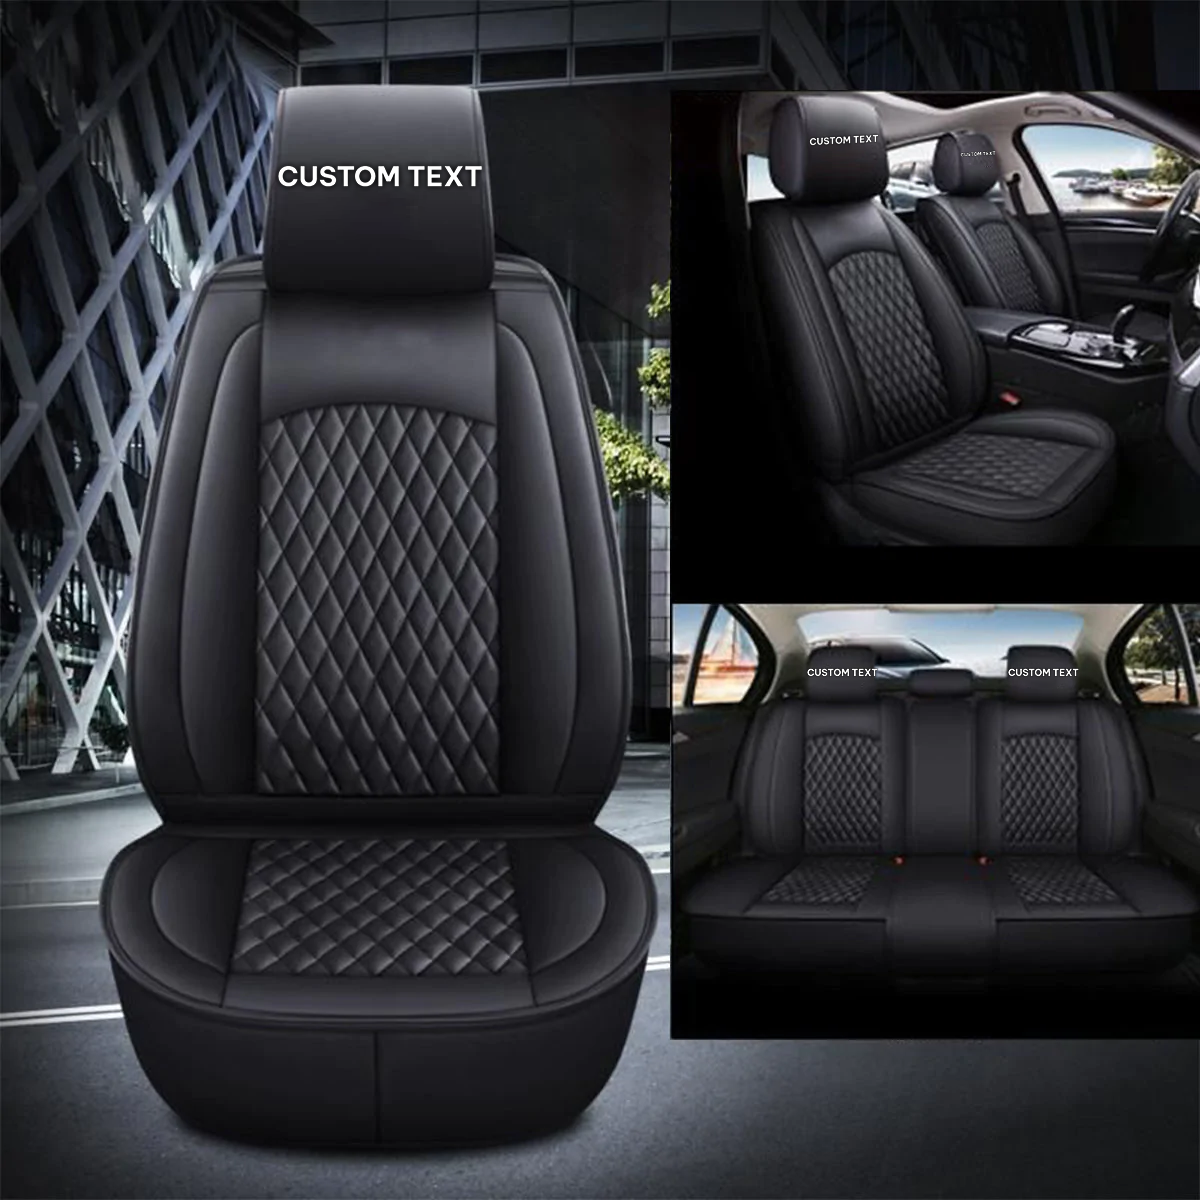 Custom Text For Seat Covers 5 Seats Full Set, Custom Fit For Your Cars, Leatherette Automotive Seat Cushion Protector Universal Fit, Vehicle Auto Interior Decor MY13988